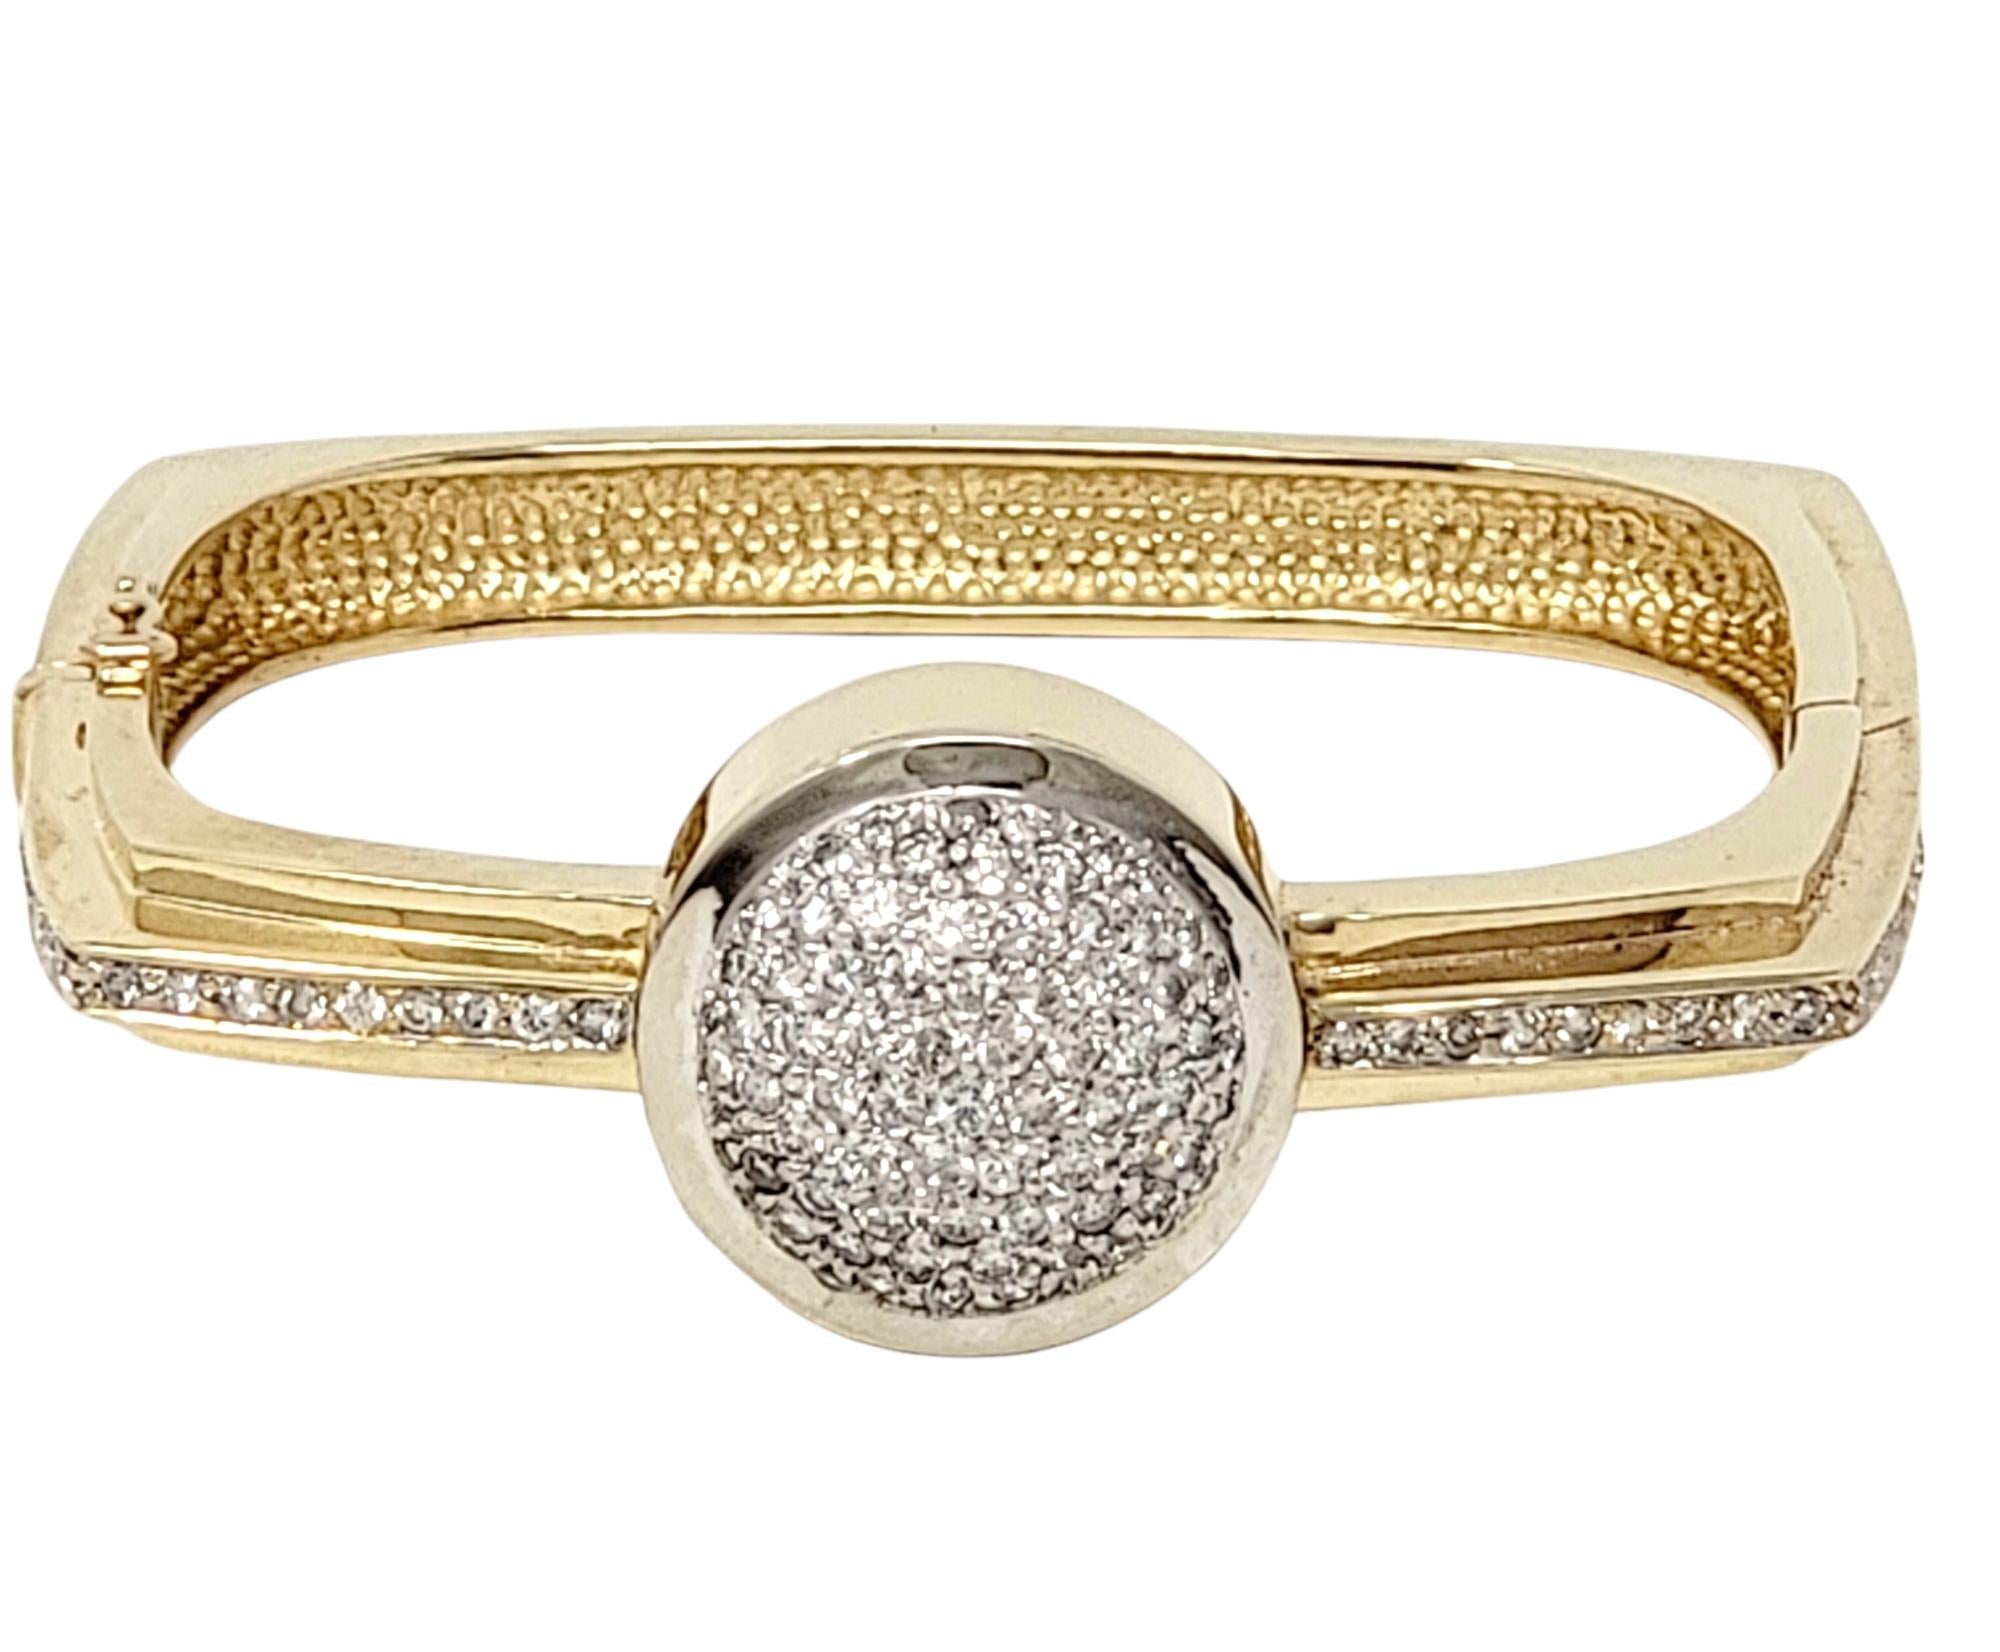 Ultra contemporary pave diamond bangle bracelet in two tone 14 karat gold. The sleek, modern design features a squared yellow gold design accented by a single row of glittering icy white pave diamonds. The bold focal point at the center features a